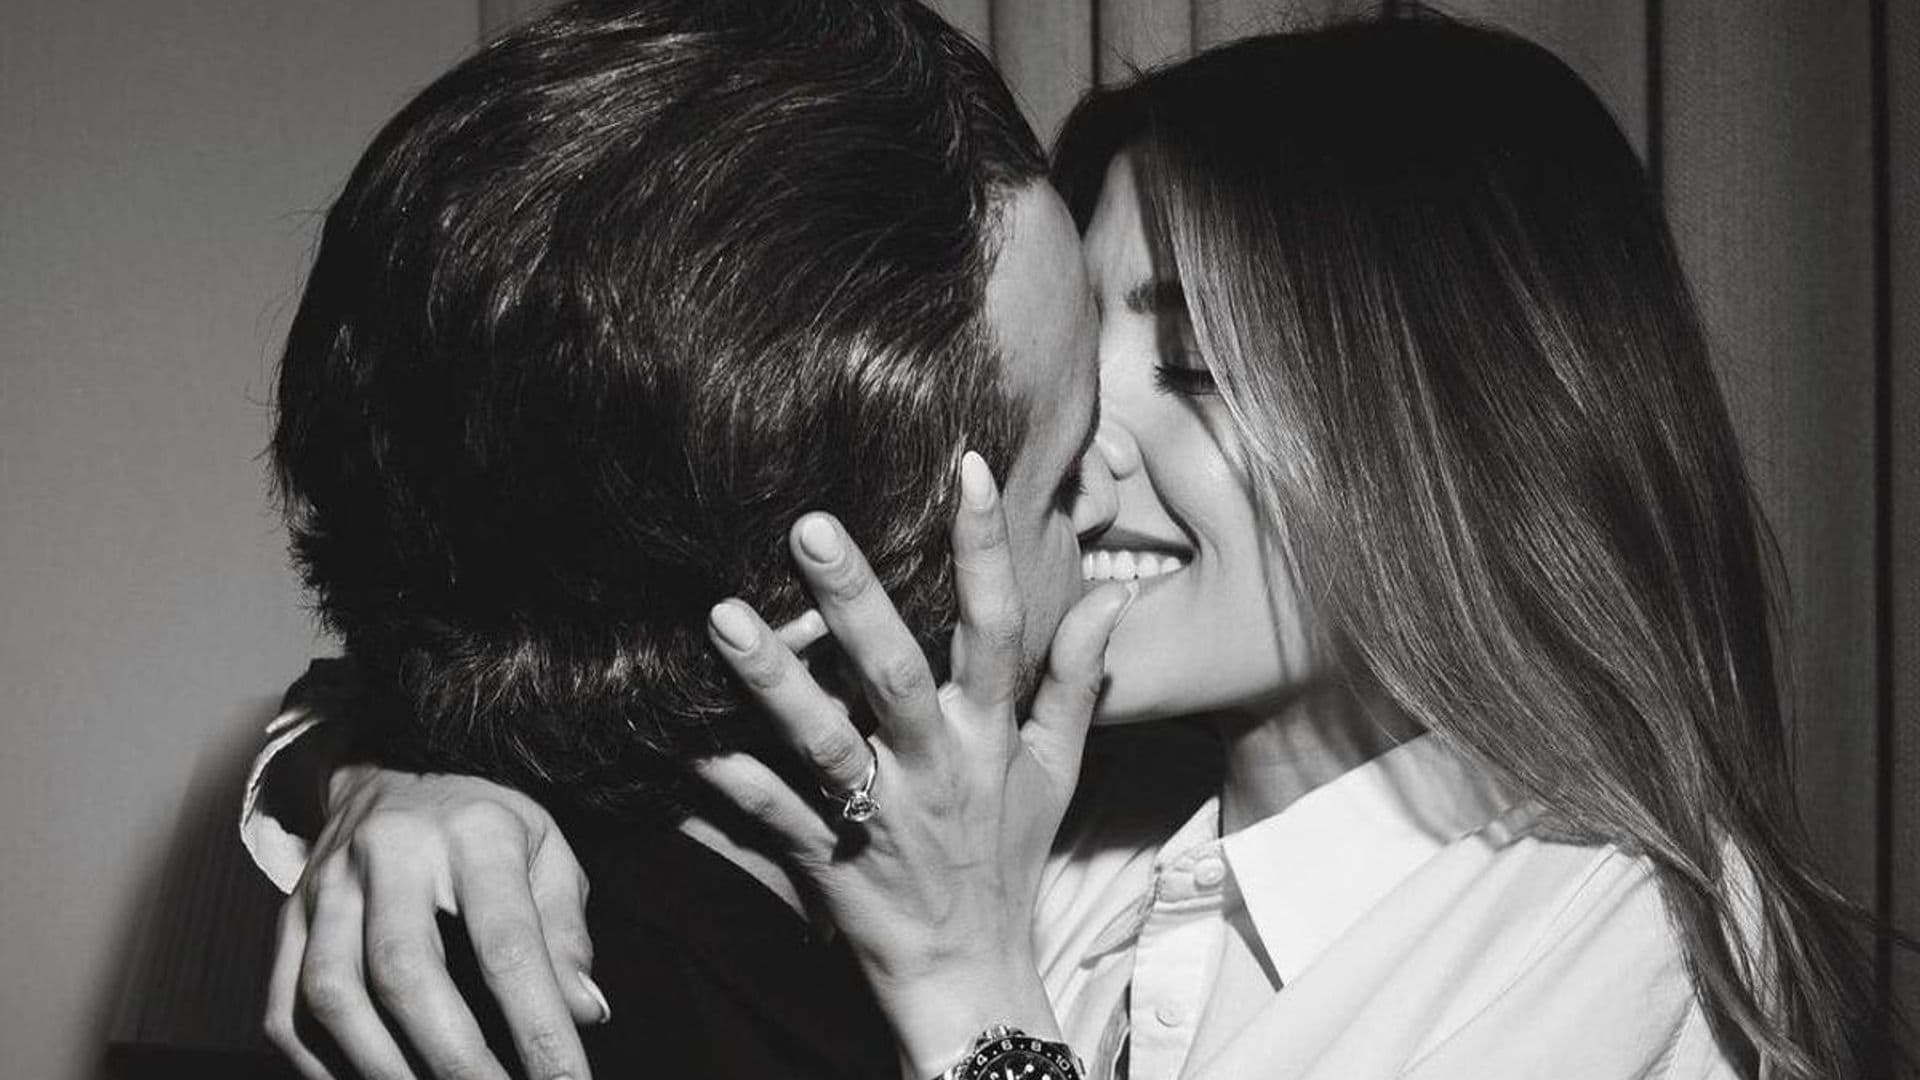 Luis Miguel’s daughter Michelle Salas is engaged: ‘The beginning of forever’